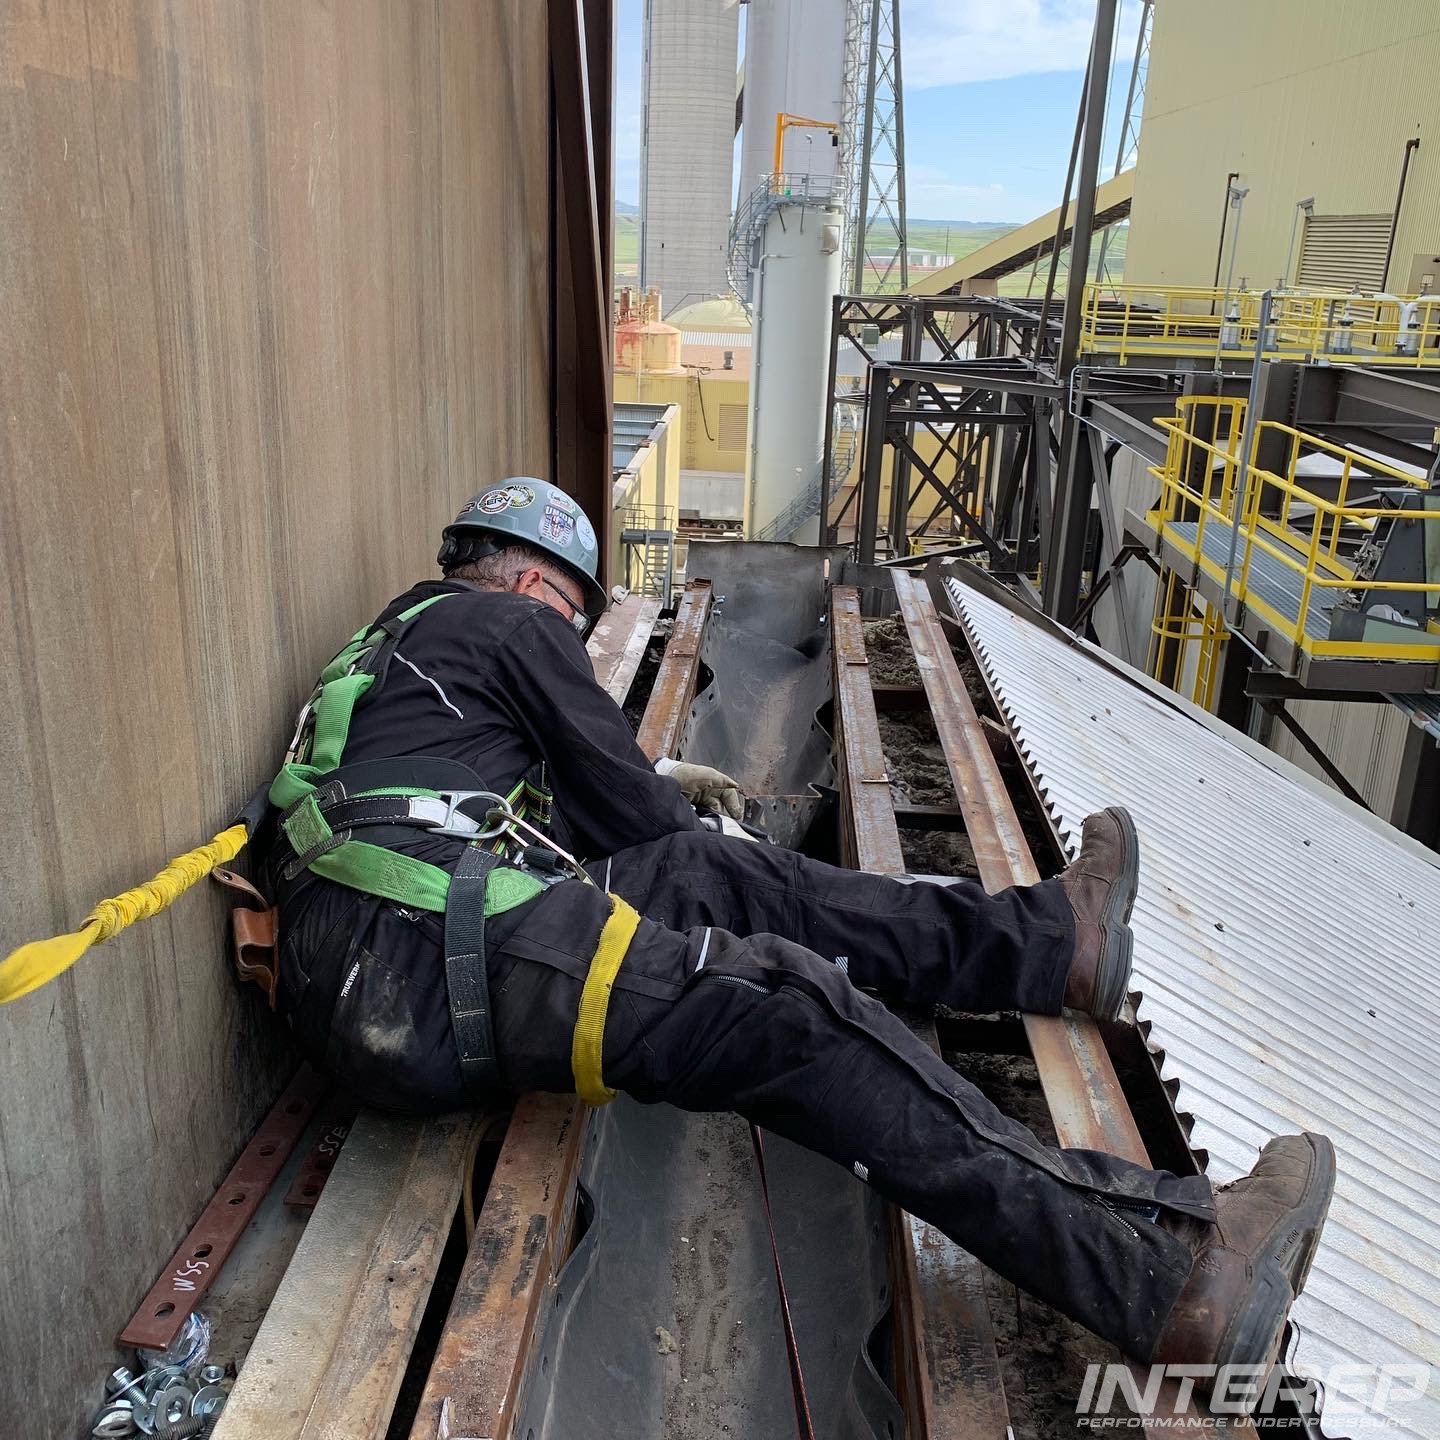 We think we have the coolest job. At this Coal Plant, we had 10 EJ splices to do. All requiring us to be tied in with access only possible by lift, scaffolding, or stairs. These Rubber EJs had to be heat cured, meaning we had an INTEREP crew working around the clock for 4 days. This was a fun one. 😆 check out our Instagram for more pictures of this job. @interep.inc